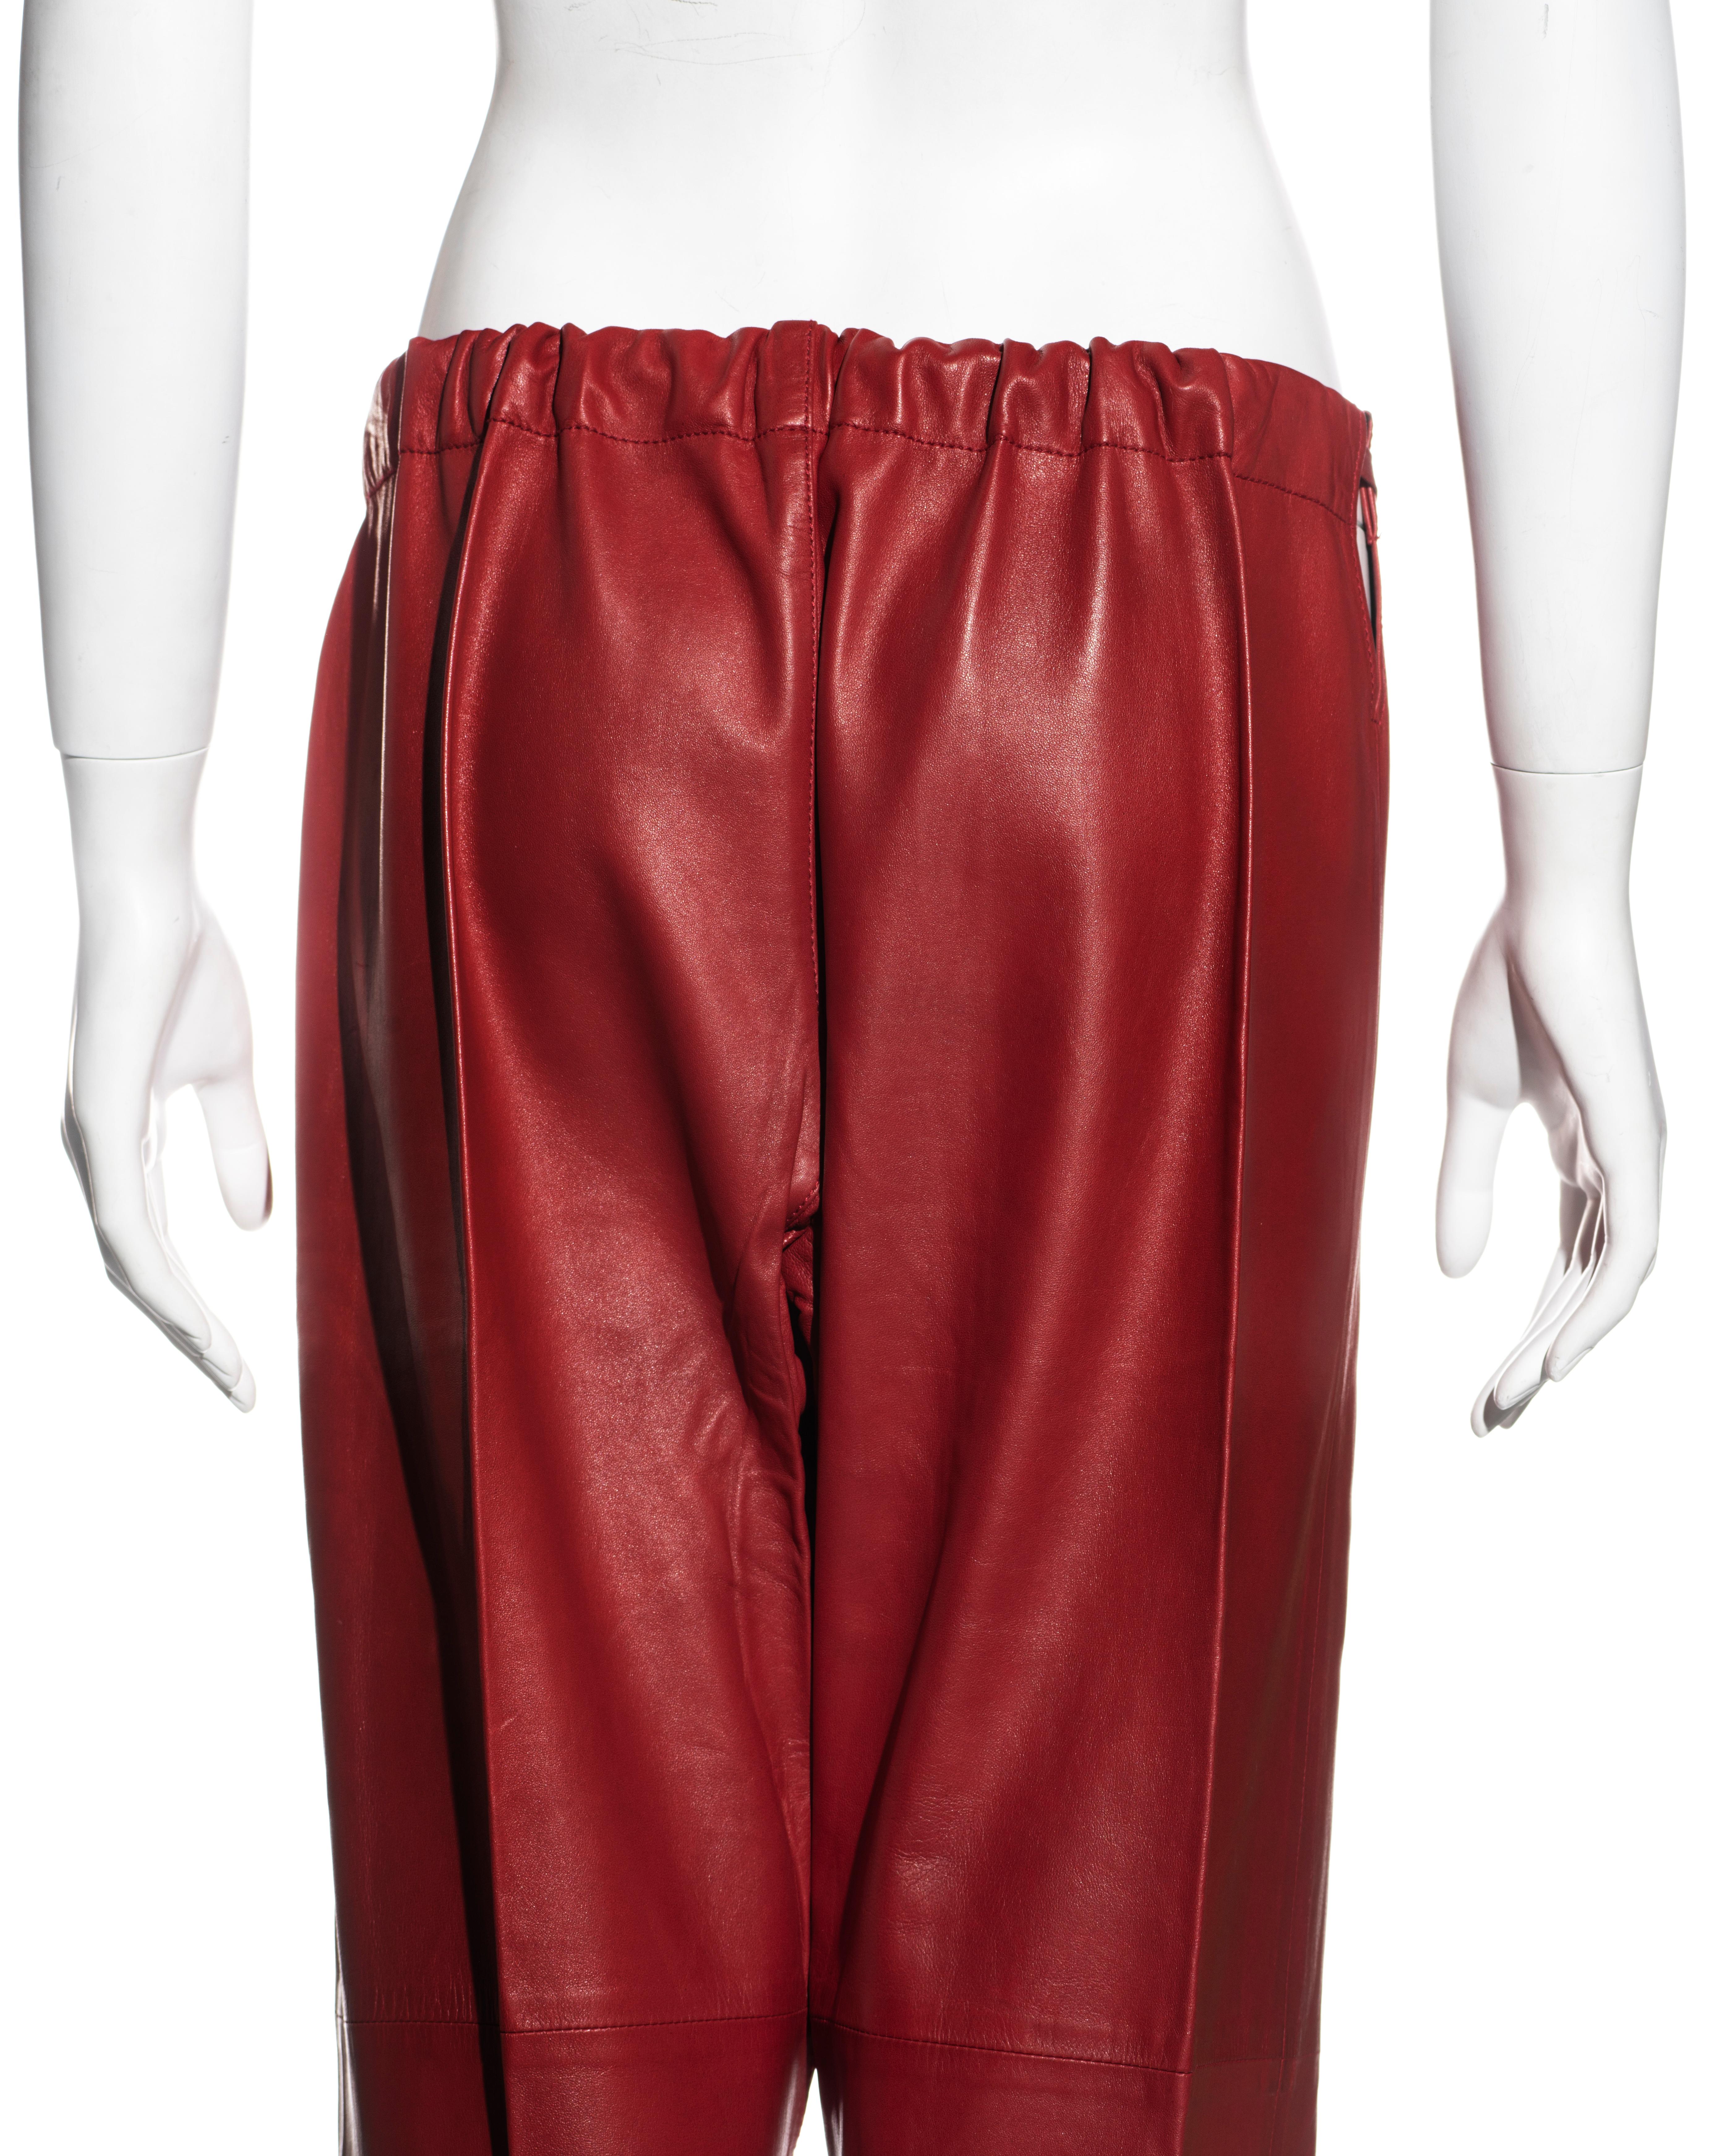 Gucci by Tom Ford red lambskin leather wide leg drawstring pants, ss 2001 For Sale 2